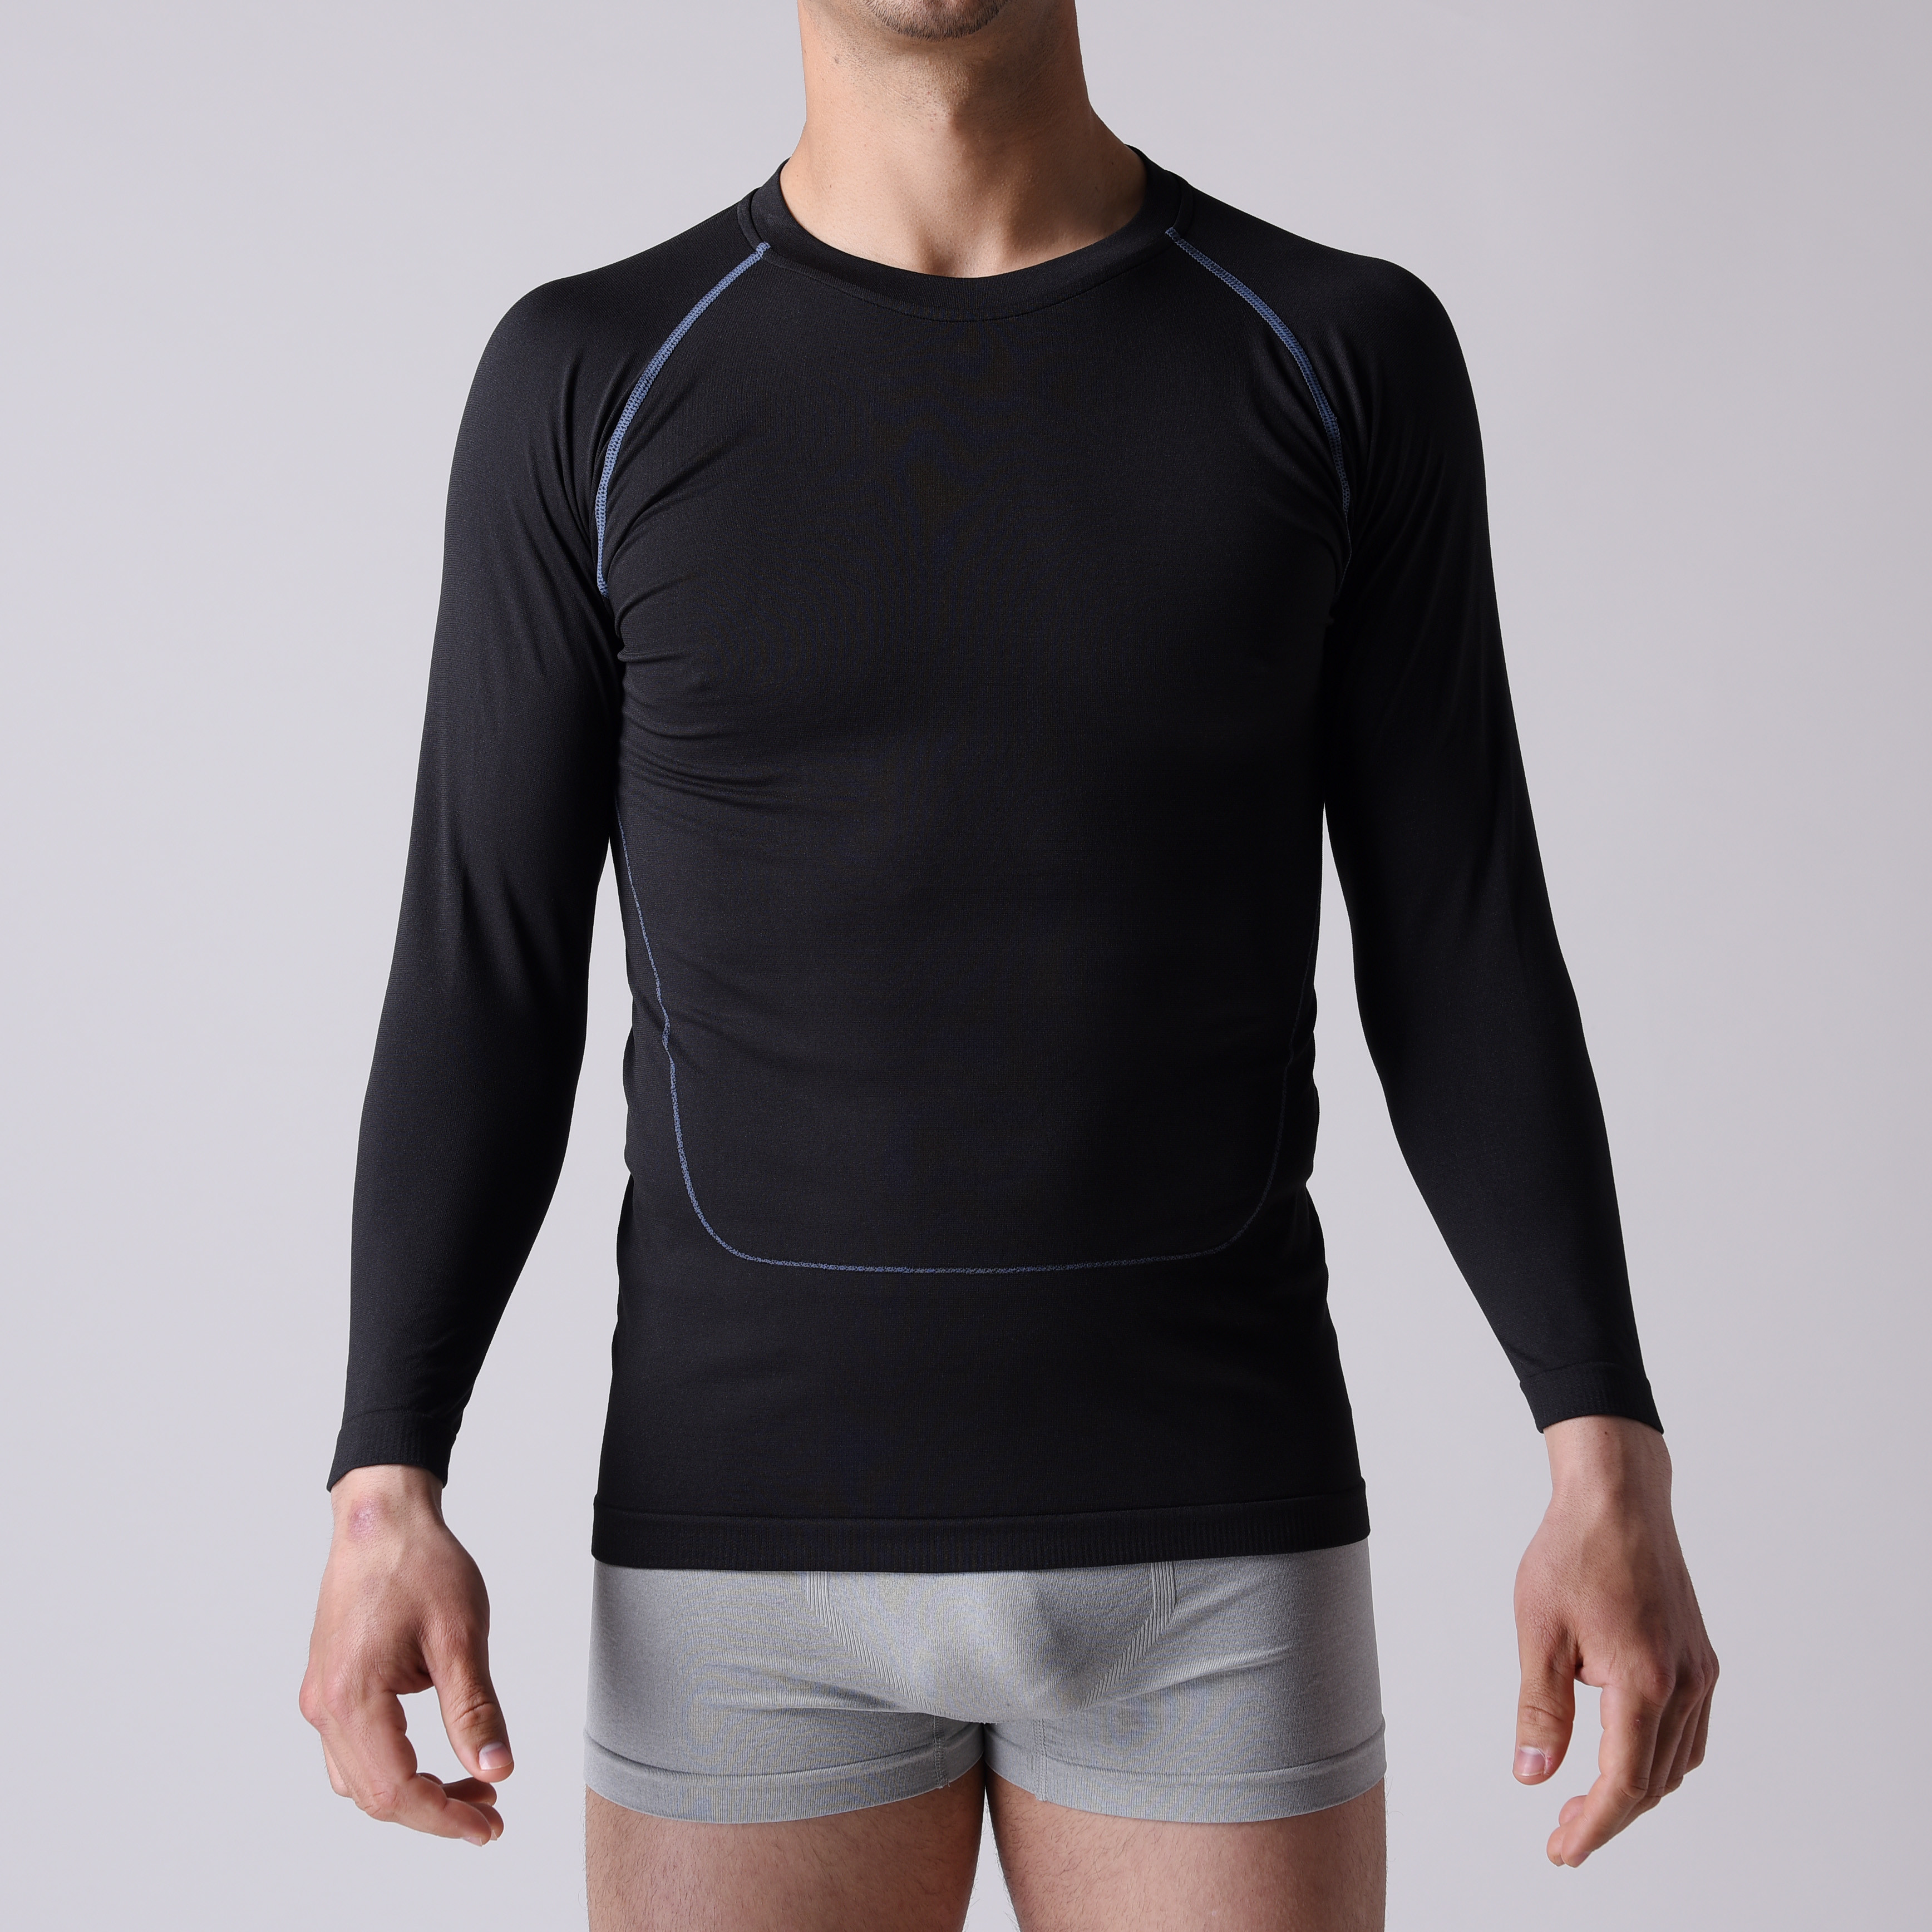 Quality Gym T-shirt, seamless OEM man sports Shirt, long sleeve, XLLS003, Functional underwear, for sale